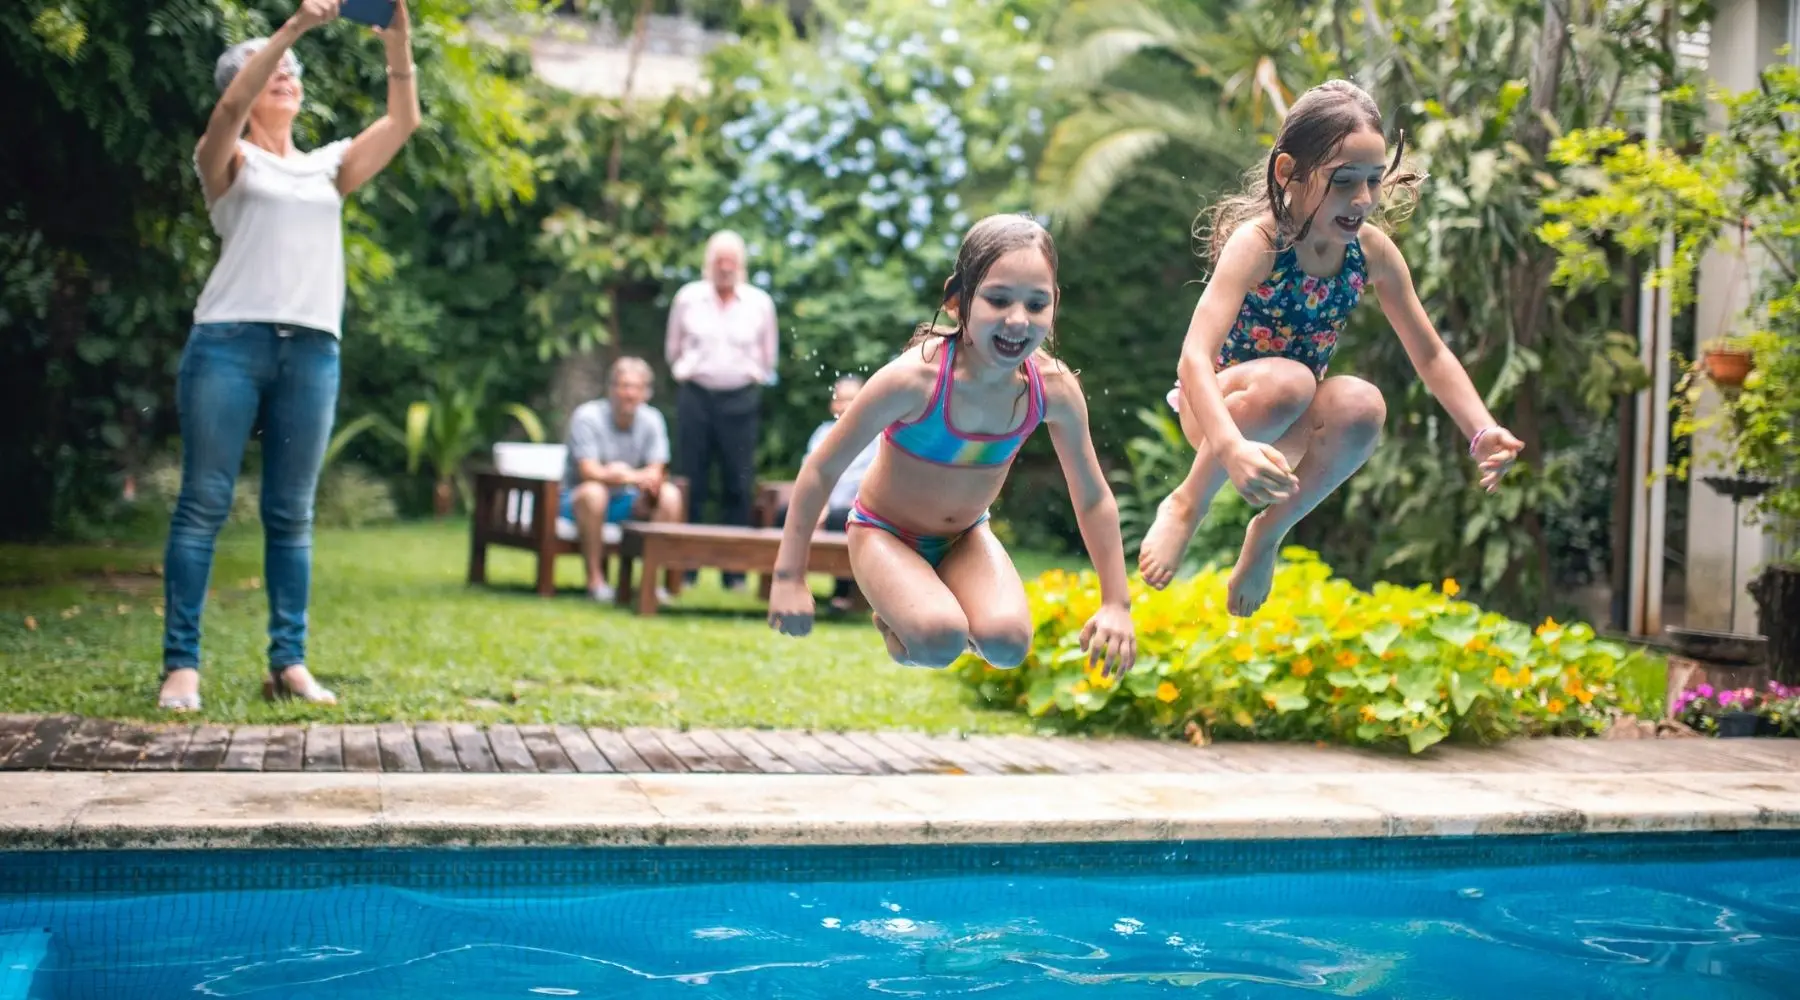 Two young girls jump into a family pool as an older relative takes photographs.